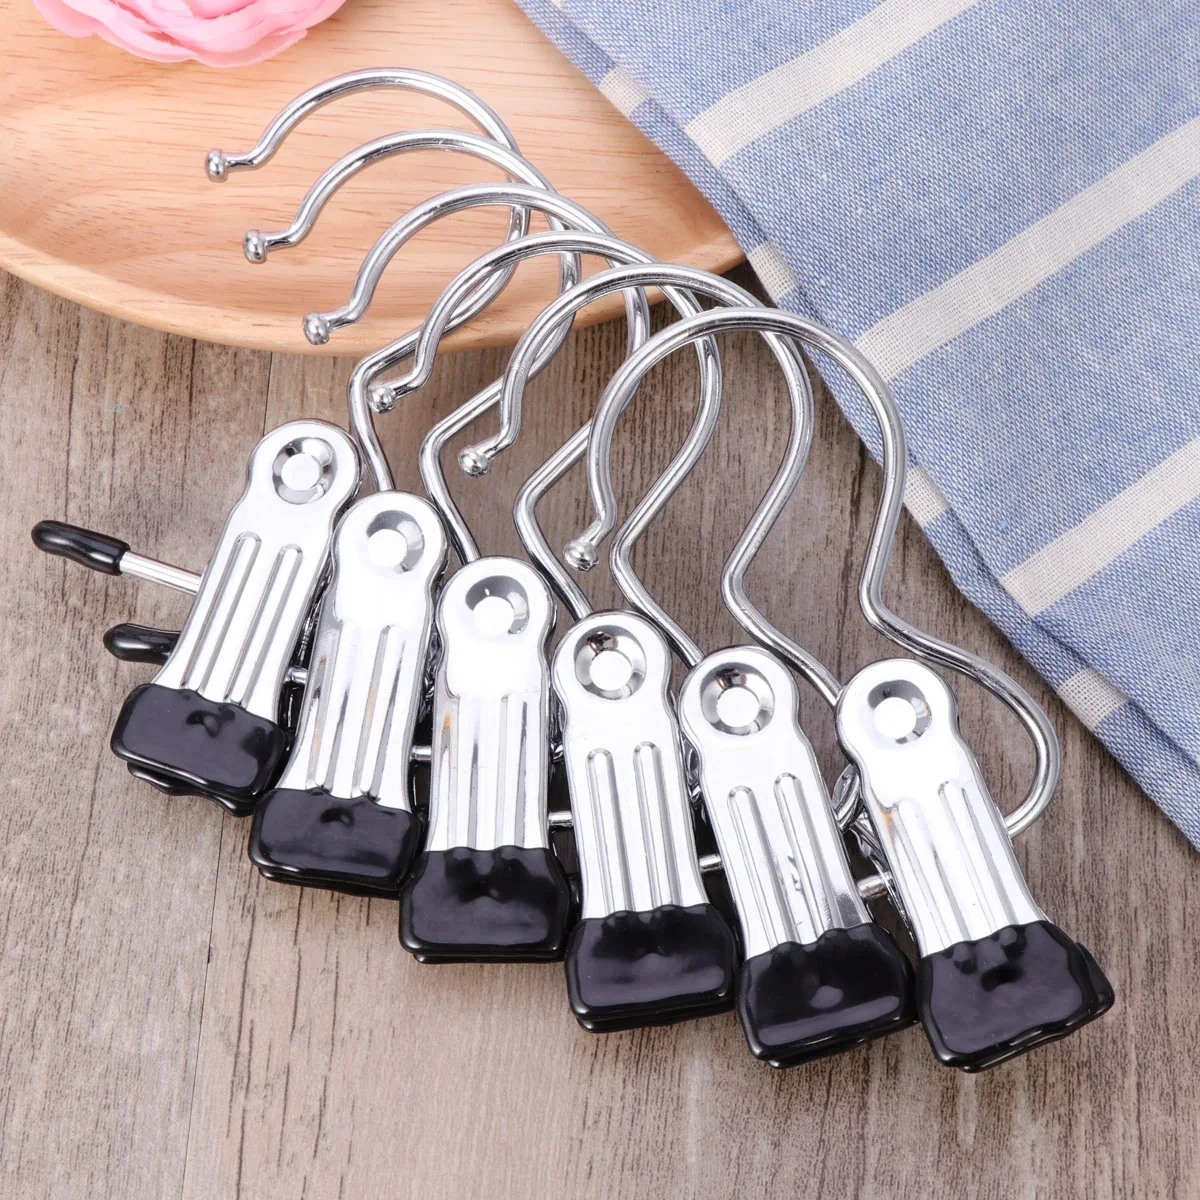 12pcs Portable Laundry Hook Hanging Clothes Pins Stainless Steel Travel Home Clothing Boot Hanger Hold Clips